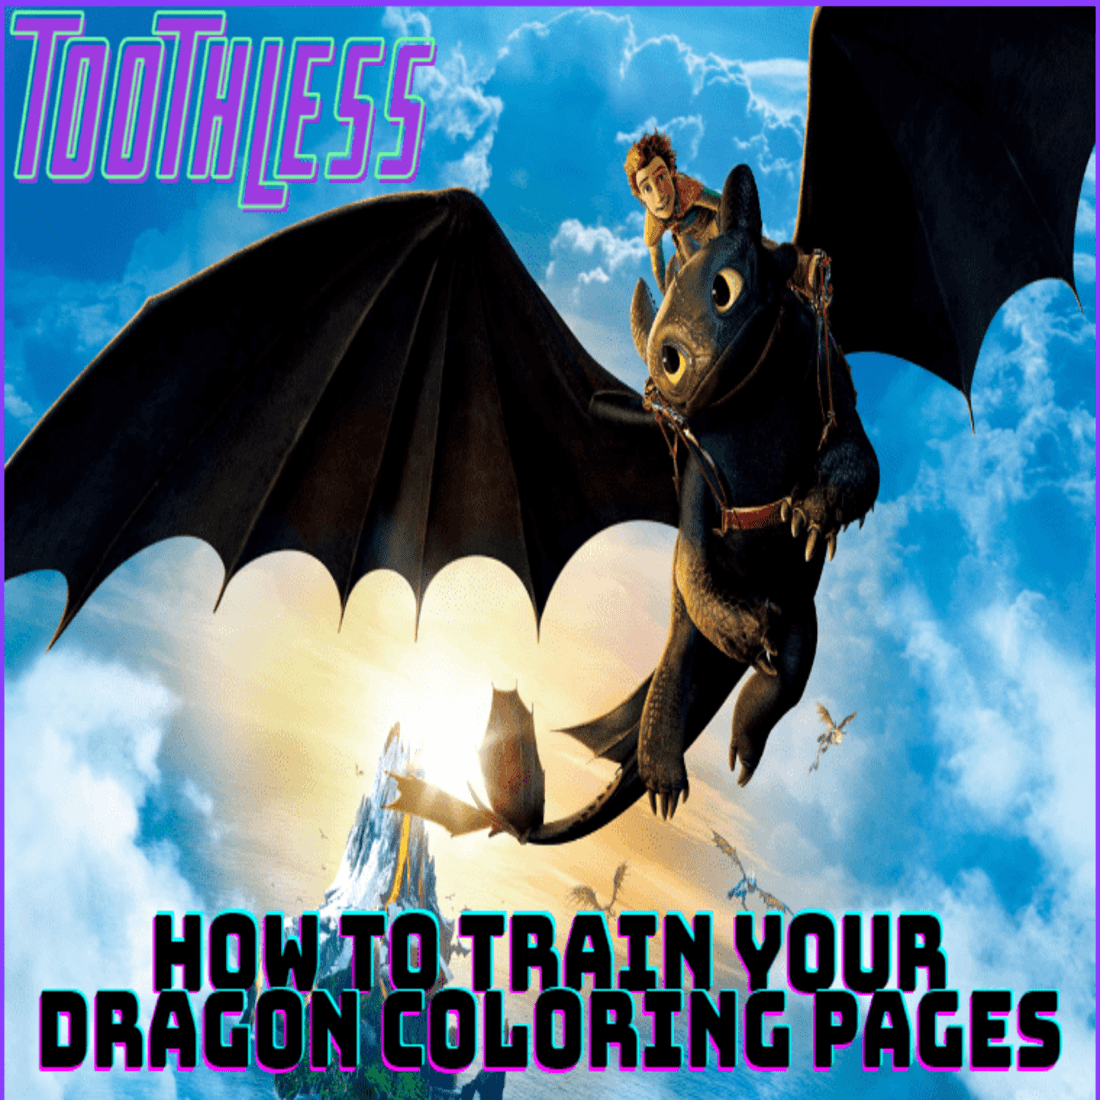 Toothless | How to Train Your Dragon preview image.